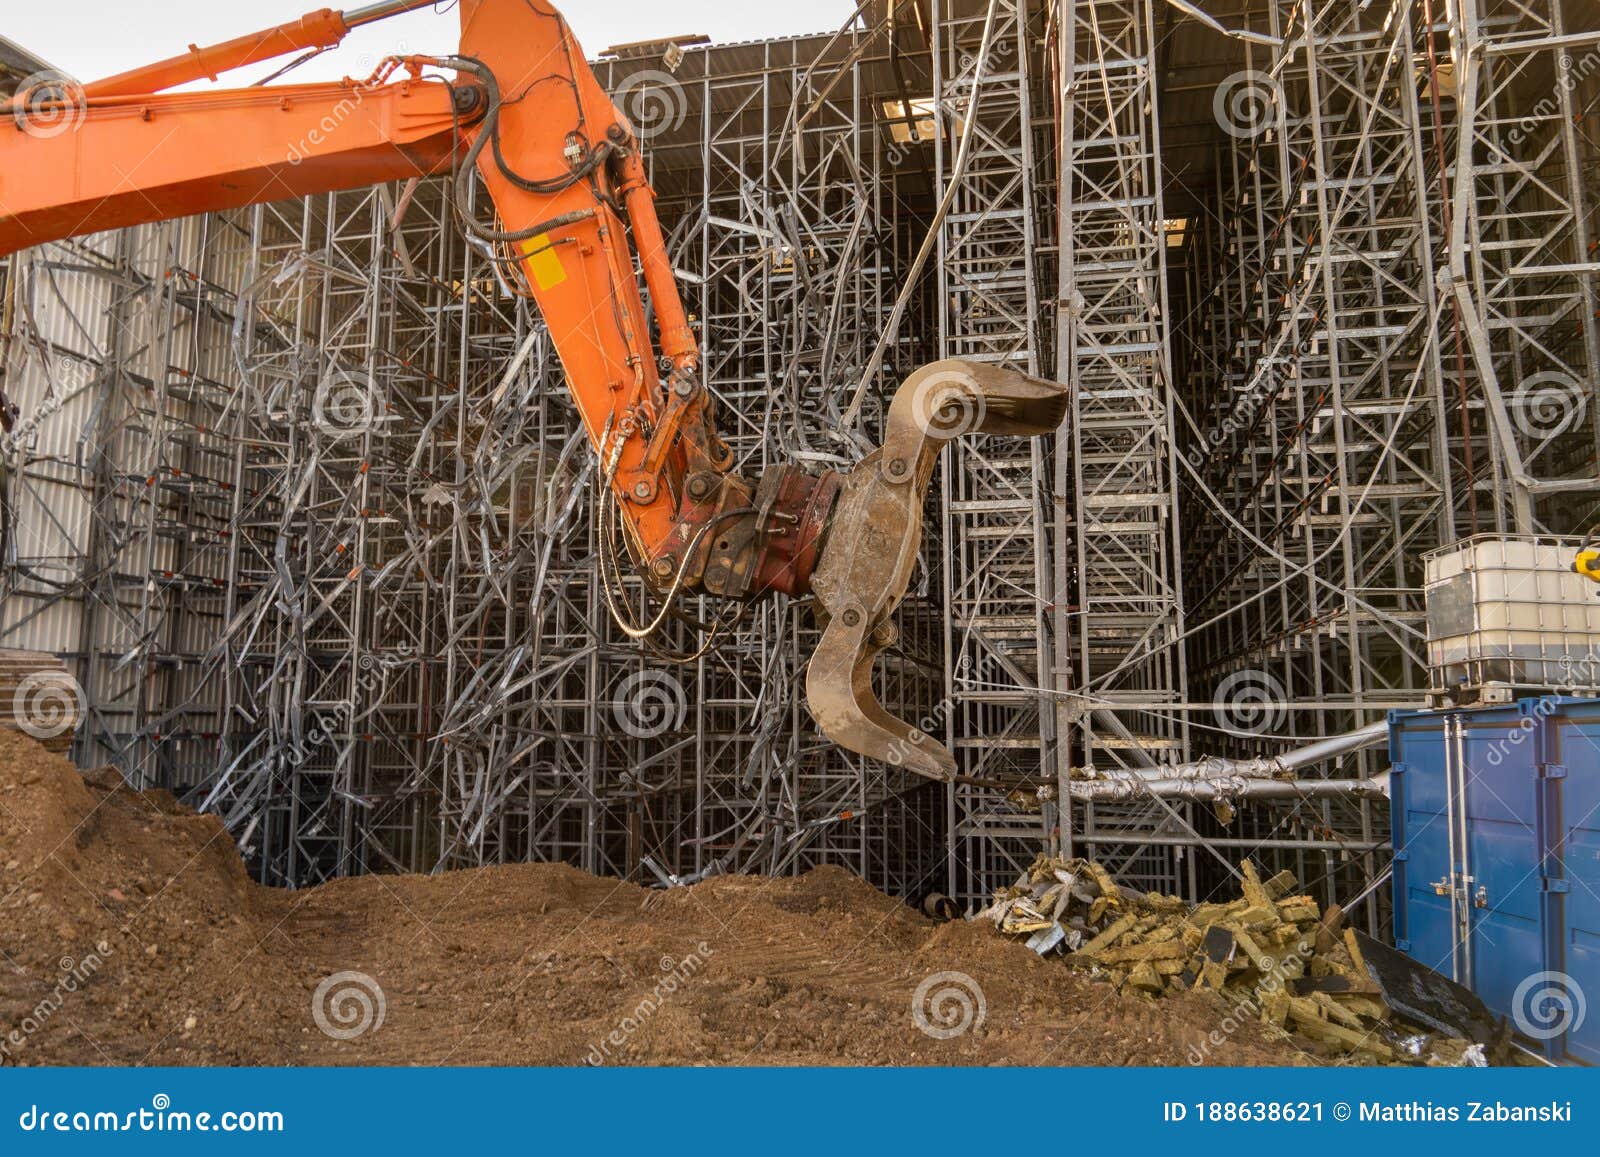 orange gripper with excavator bucket in front of a high-bay warehouse that is being torn down